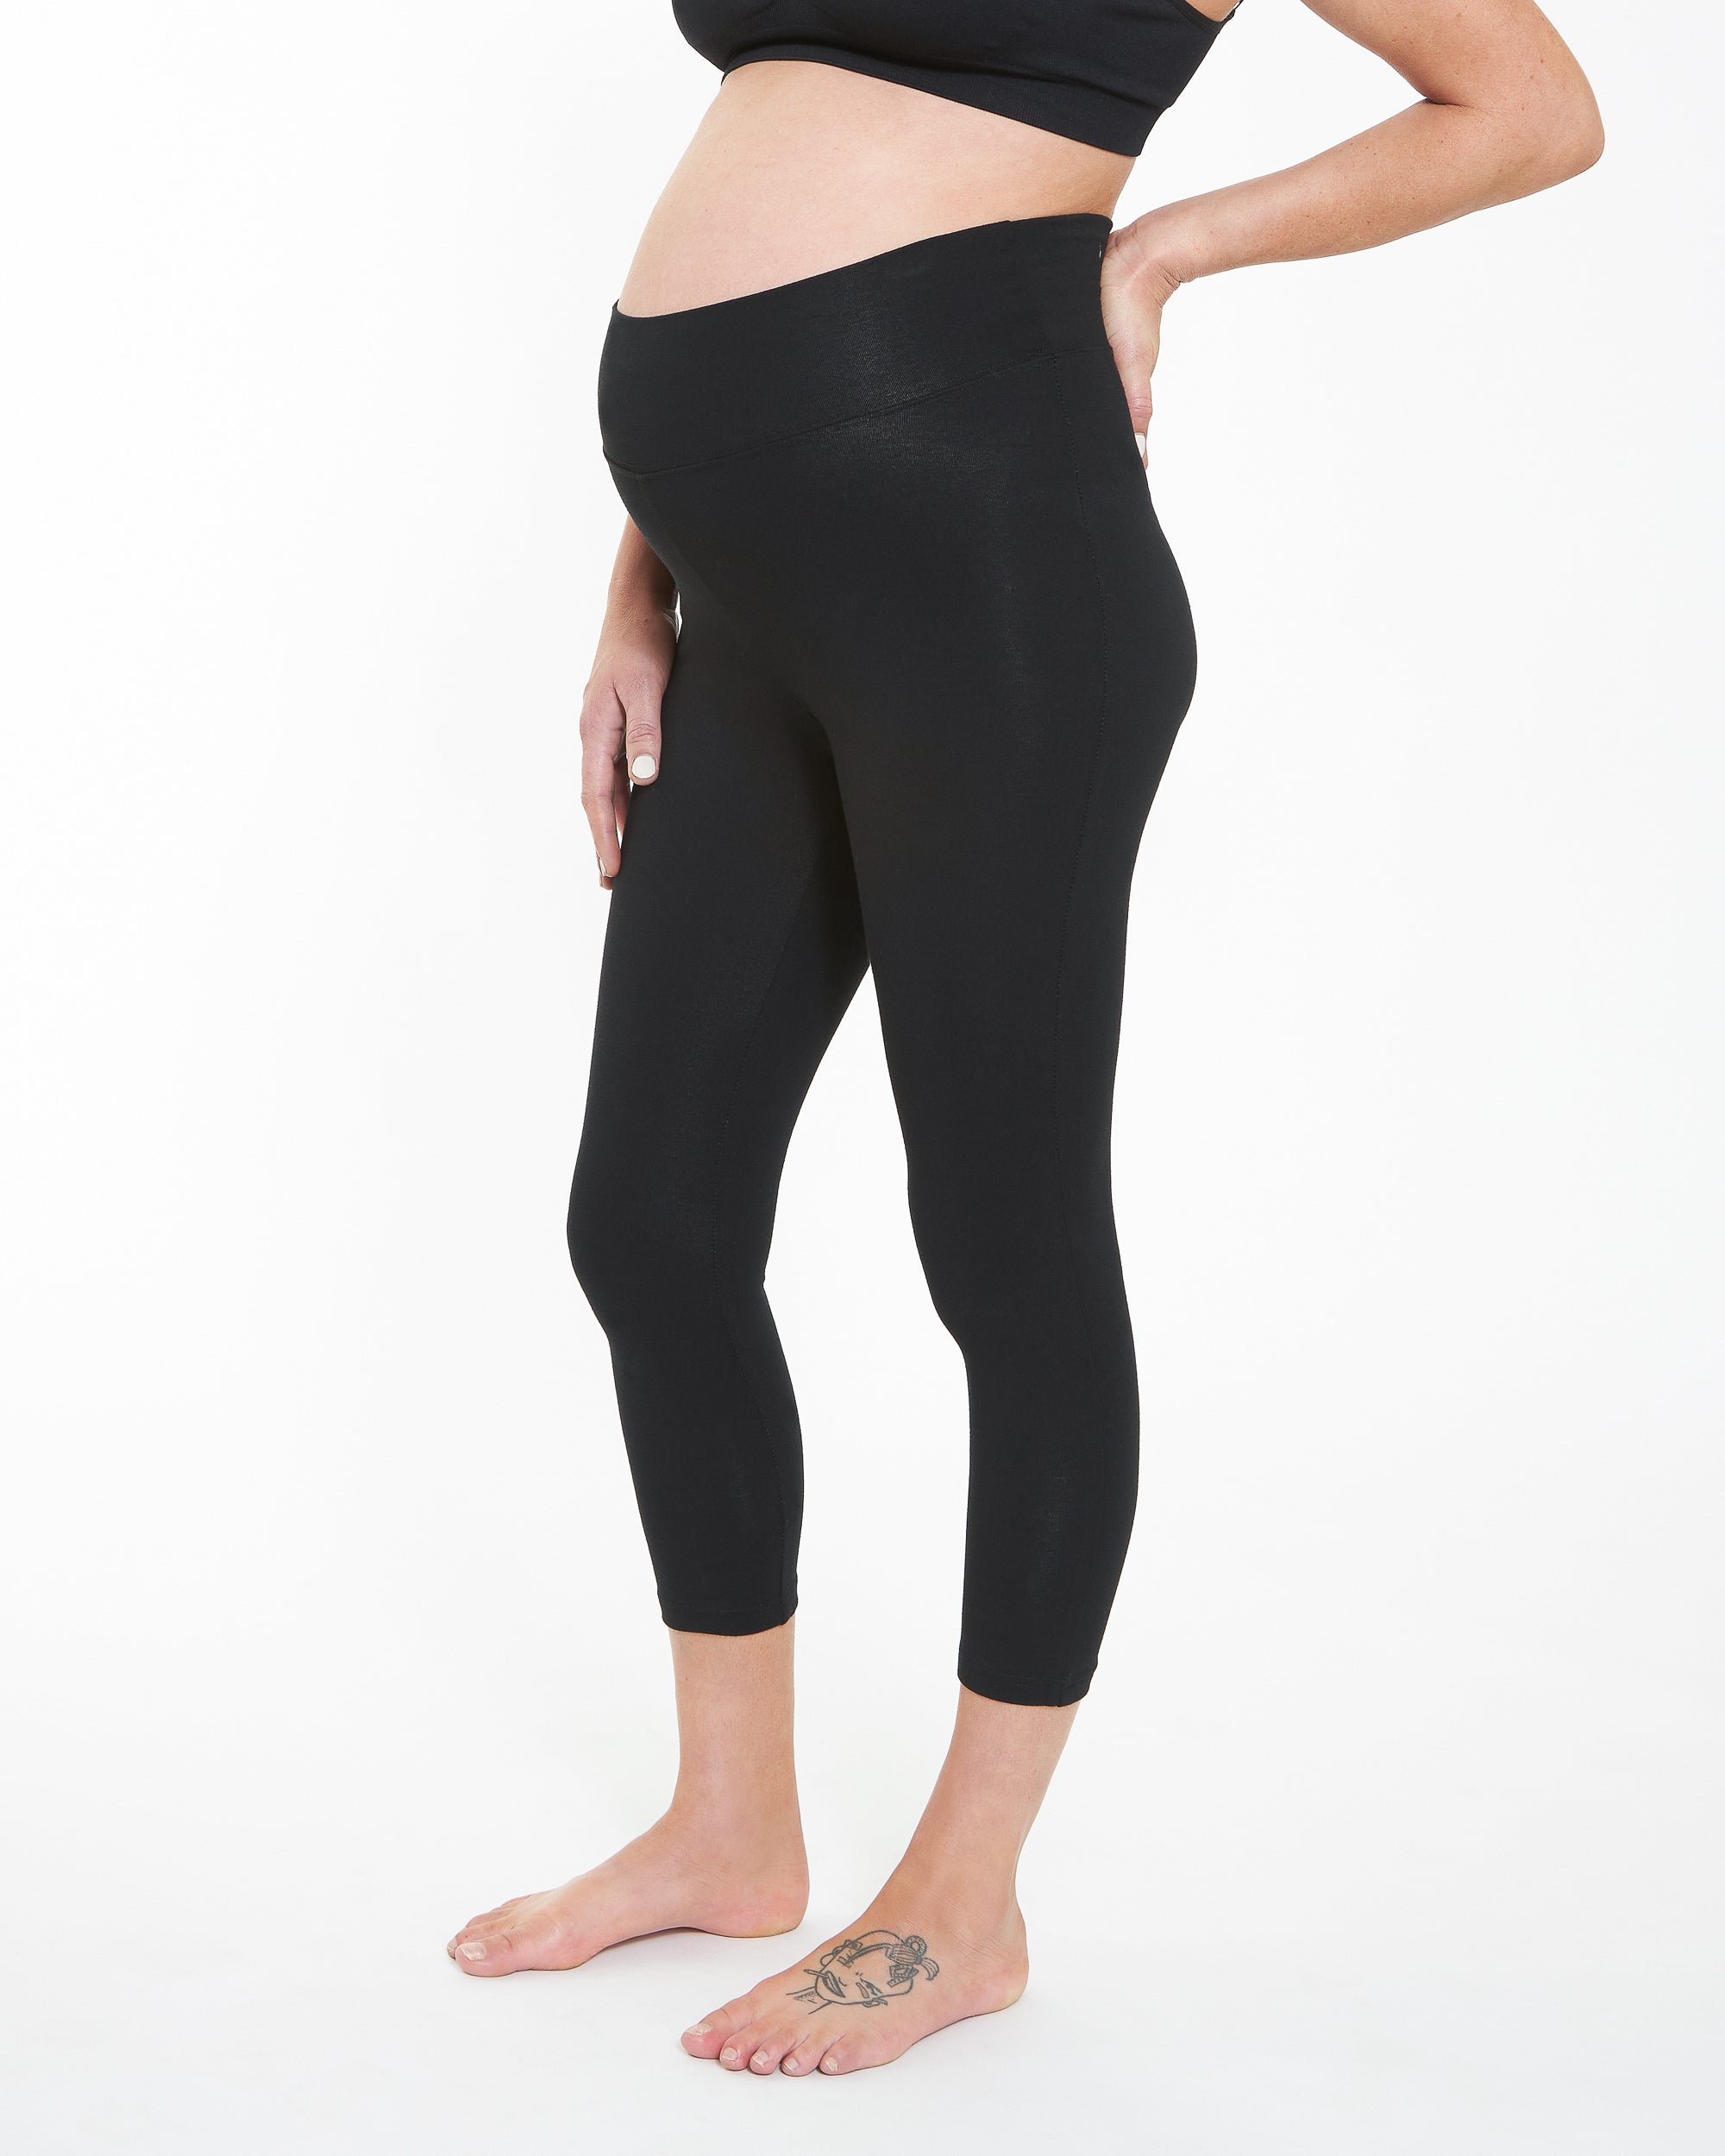 Maternity Leggings - Made to Move Maternity Workout Leggings